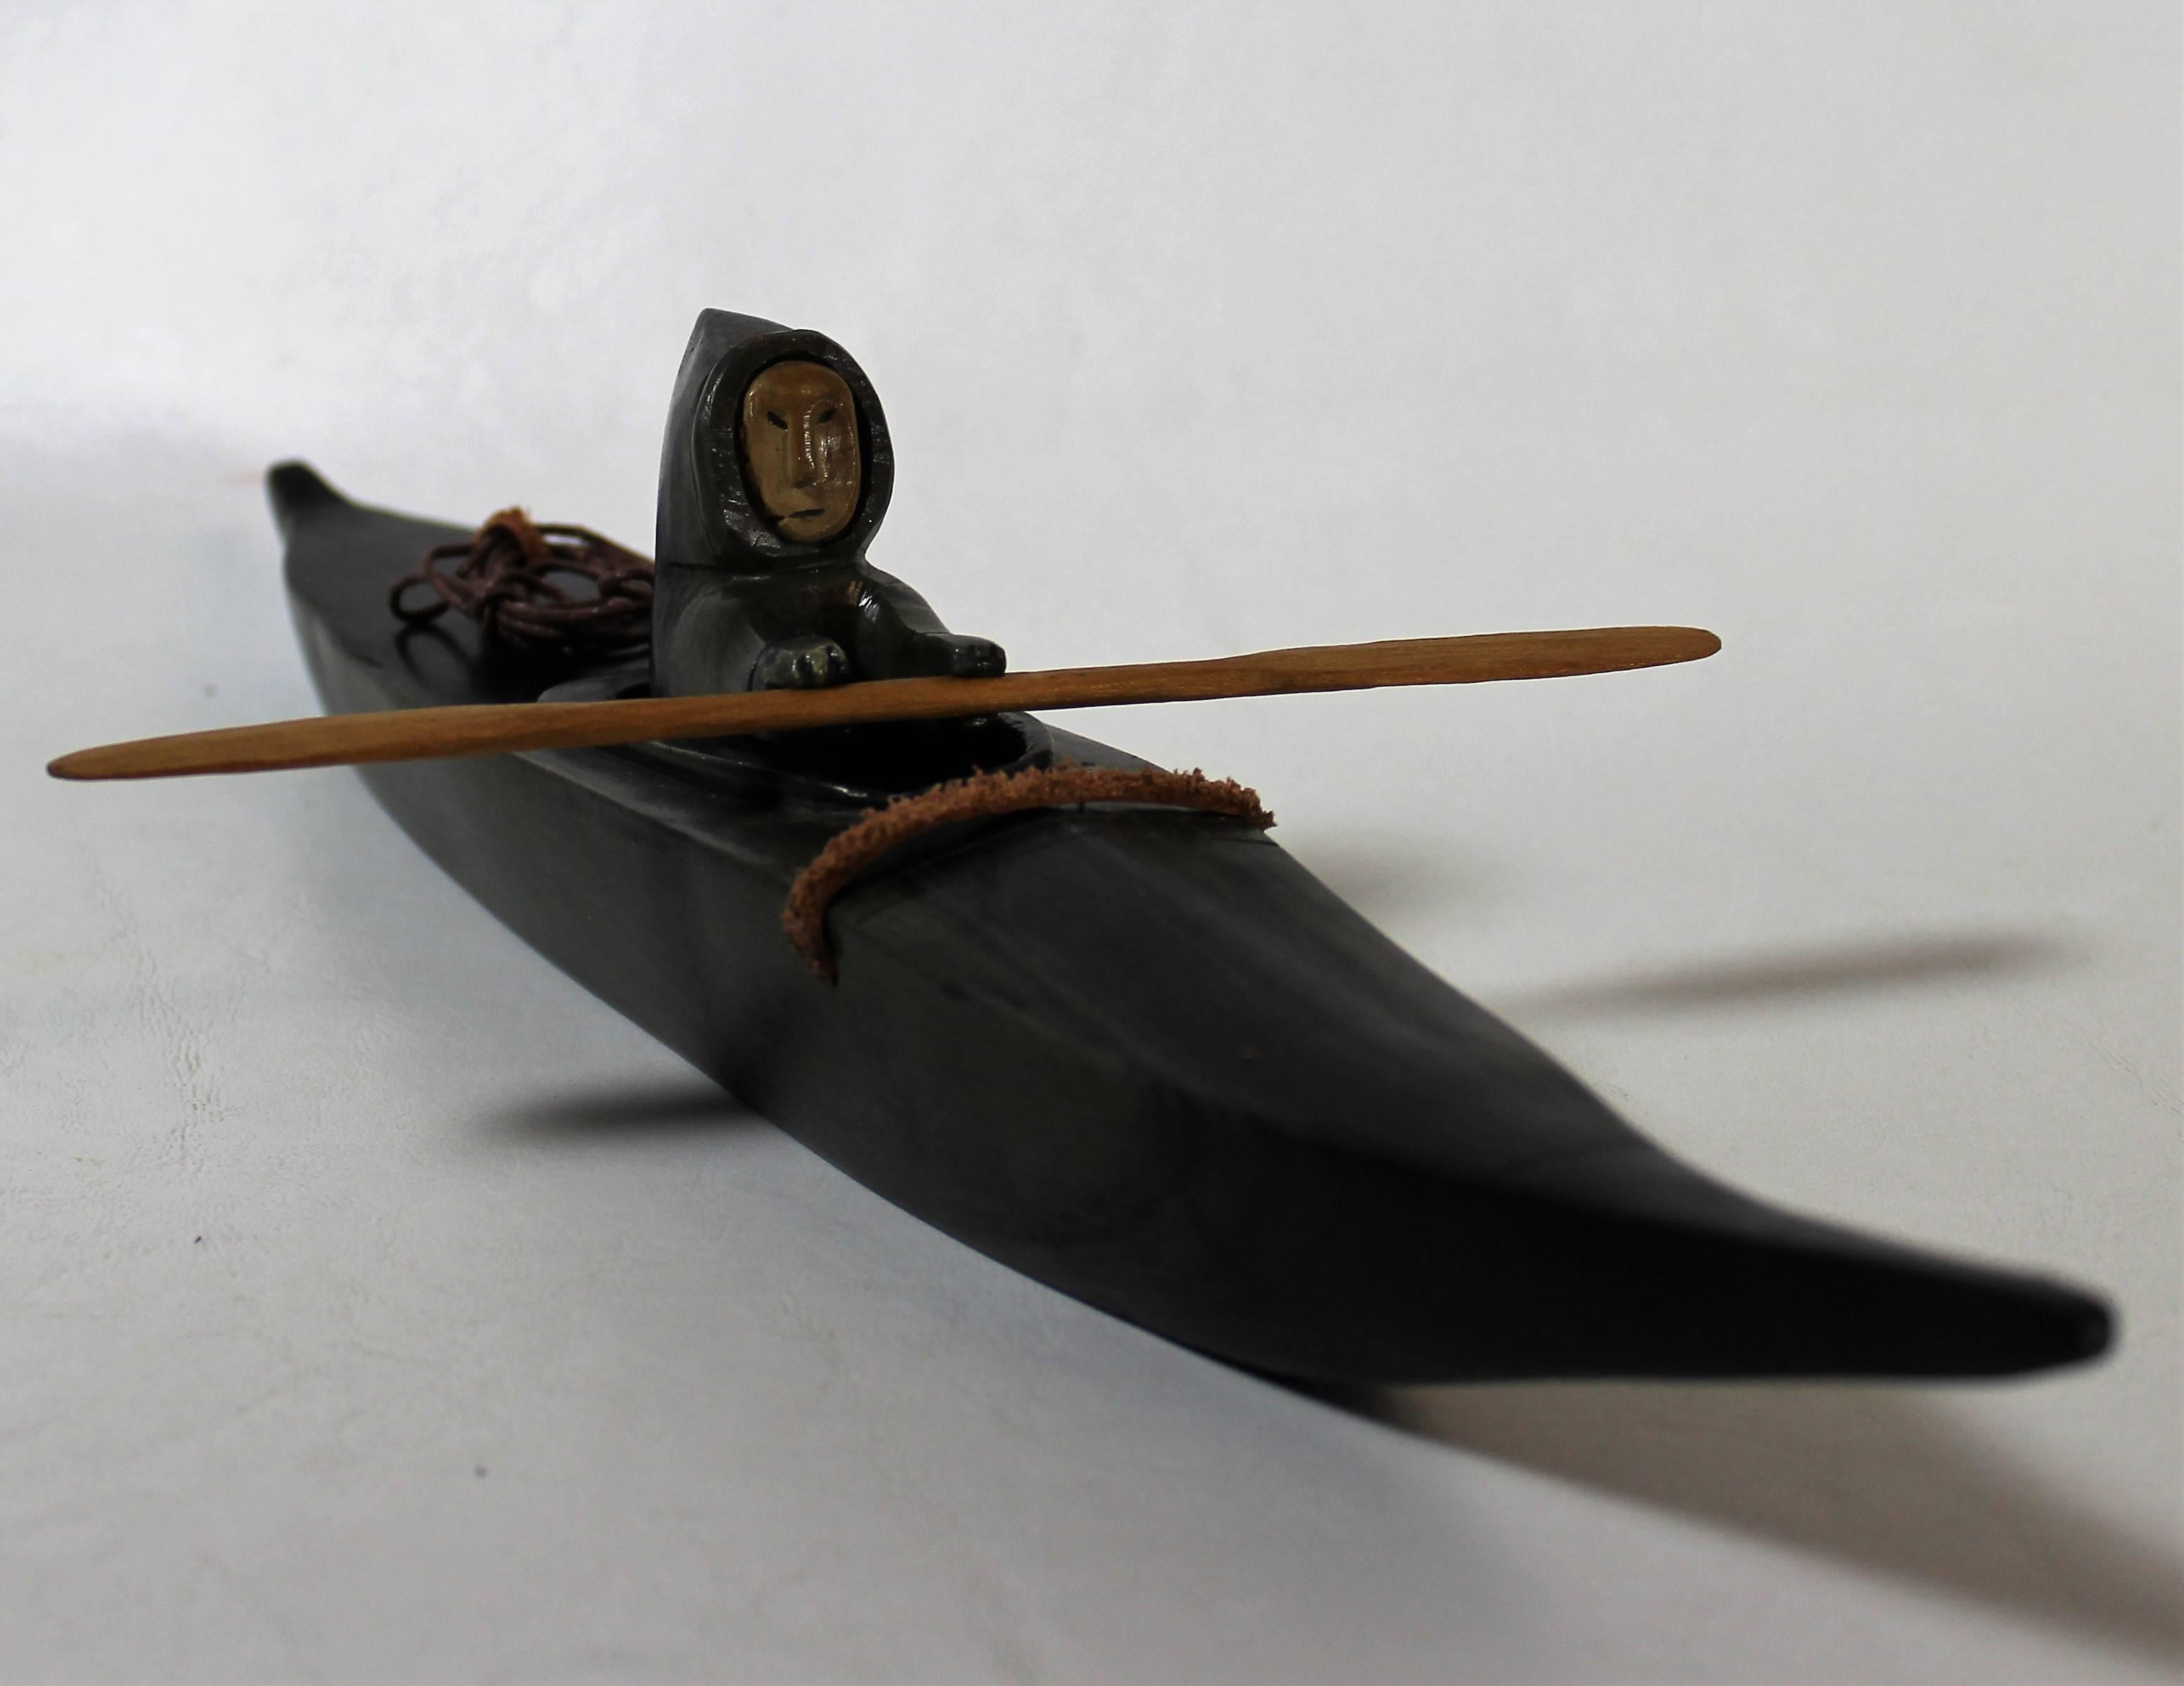 Soapstone and bone sculpture of an Inuit hunter travelling by kayak.

Kayaks are a technology that have a long history of use in the Arctic; they were an important part of subsistence and livelihood for nearly every Inuit group, and their close